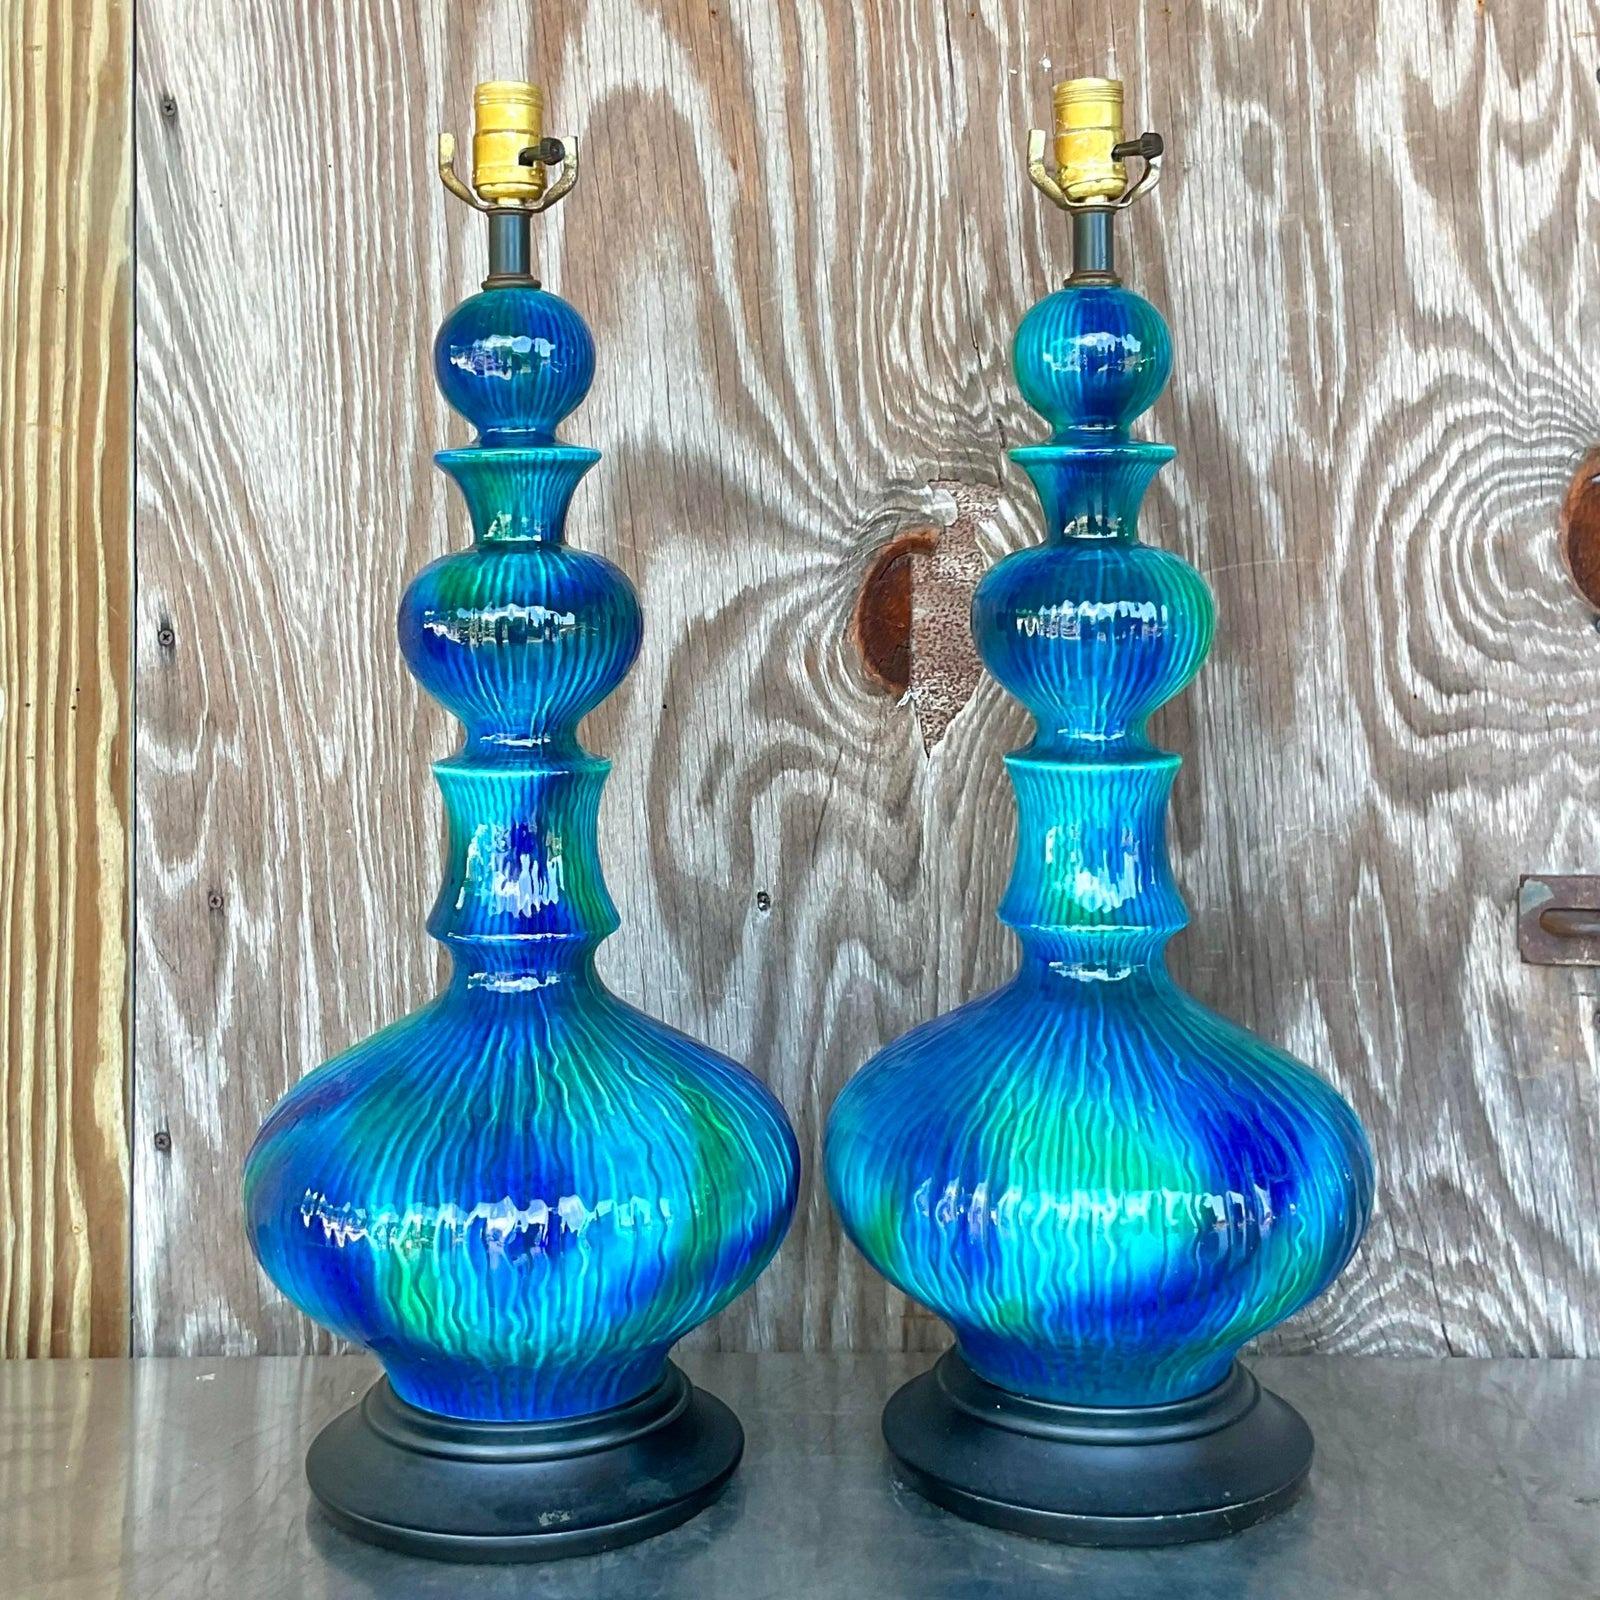 An extraordinary pair of vintage MCM table lamps. A glazed ceramic finish in a brilliant blue green combo. Acquired from a Ft Lauderdale estate.